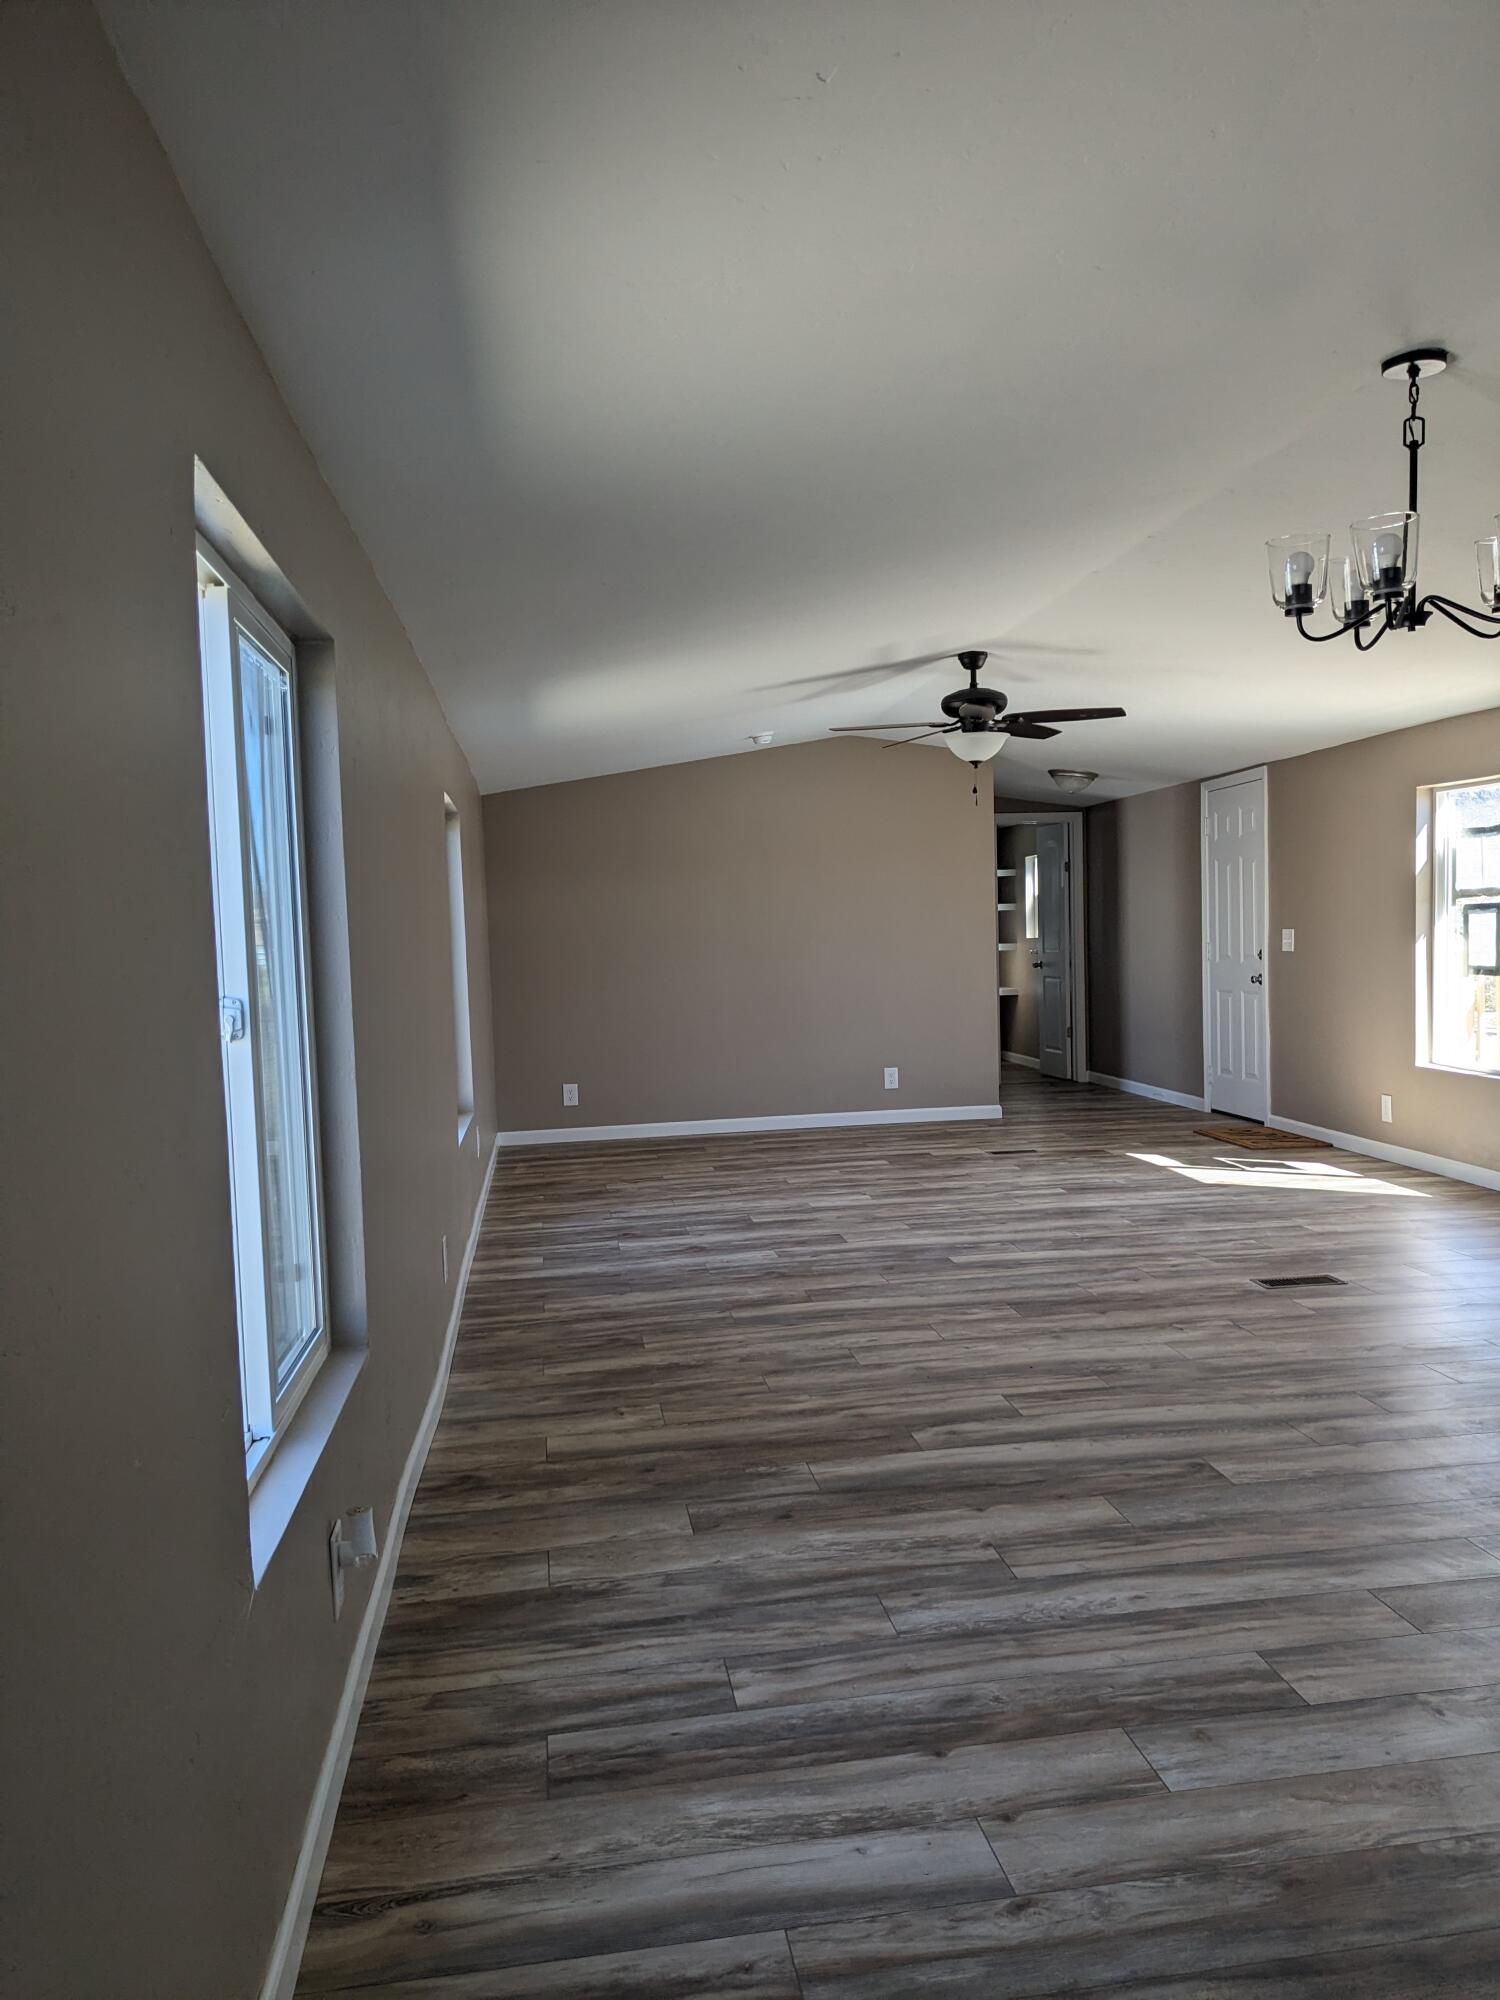 1207 Zinc Street, Truth or Consequences, New Mexico 87901, 2 Bedrooms Bedrooms, ,2 BathroomsBathrooms,Residential,For Sale,1207 Zinc Street,1059702